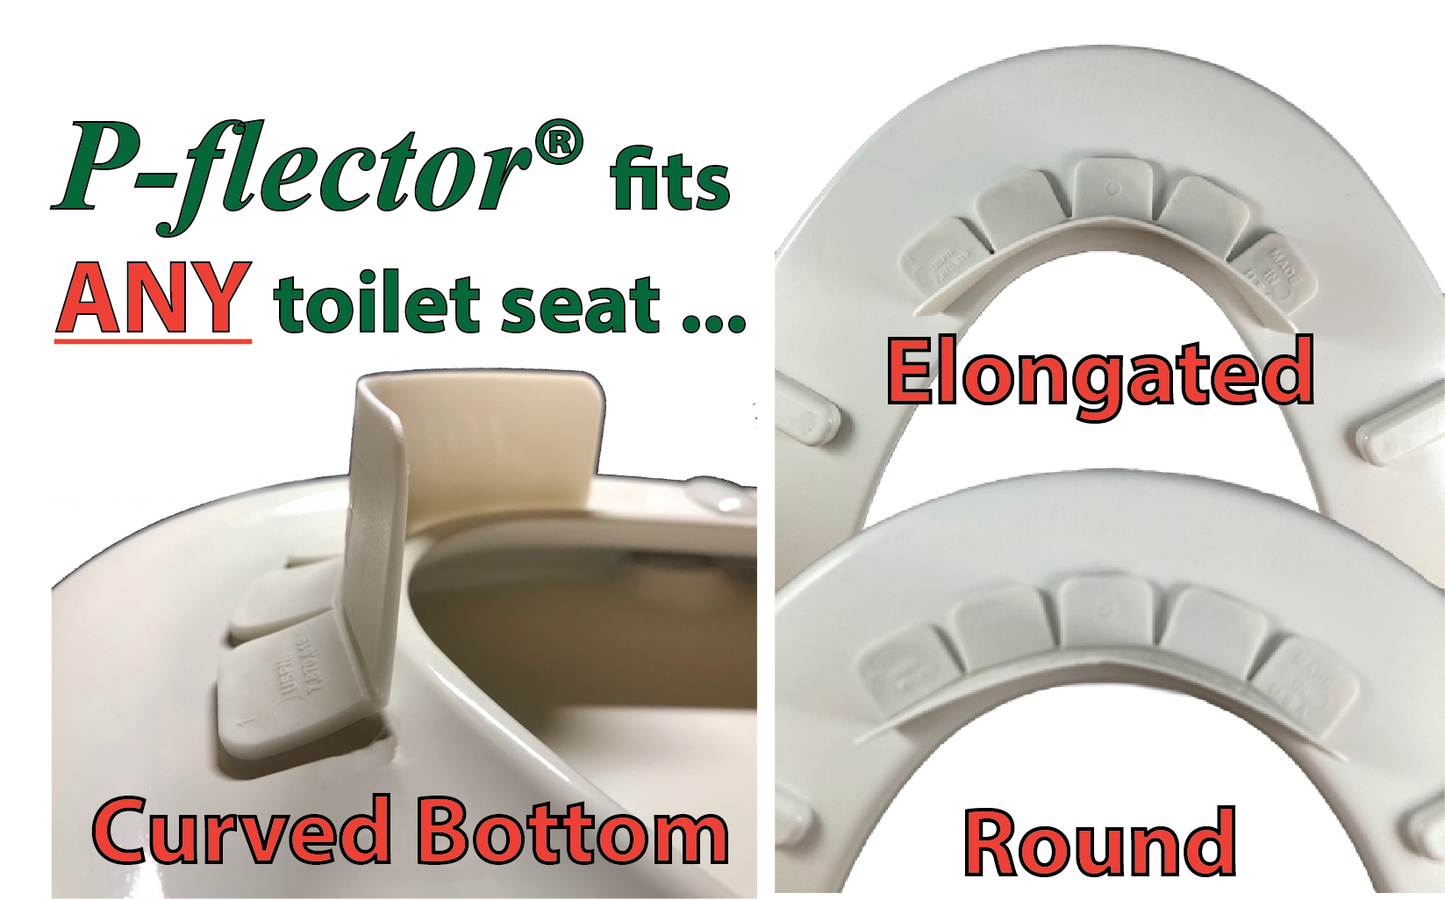 P-flector® - urine deflector keeps potty training kids and adults from peeing through the toilet seat gap